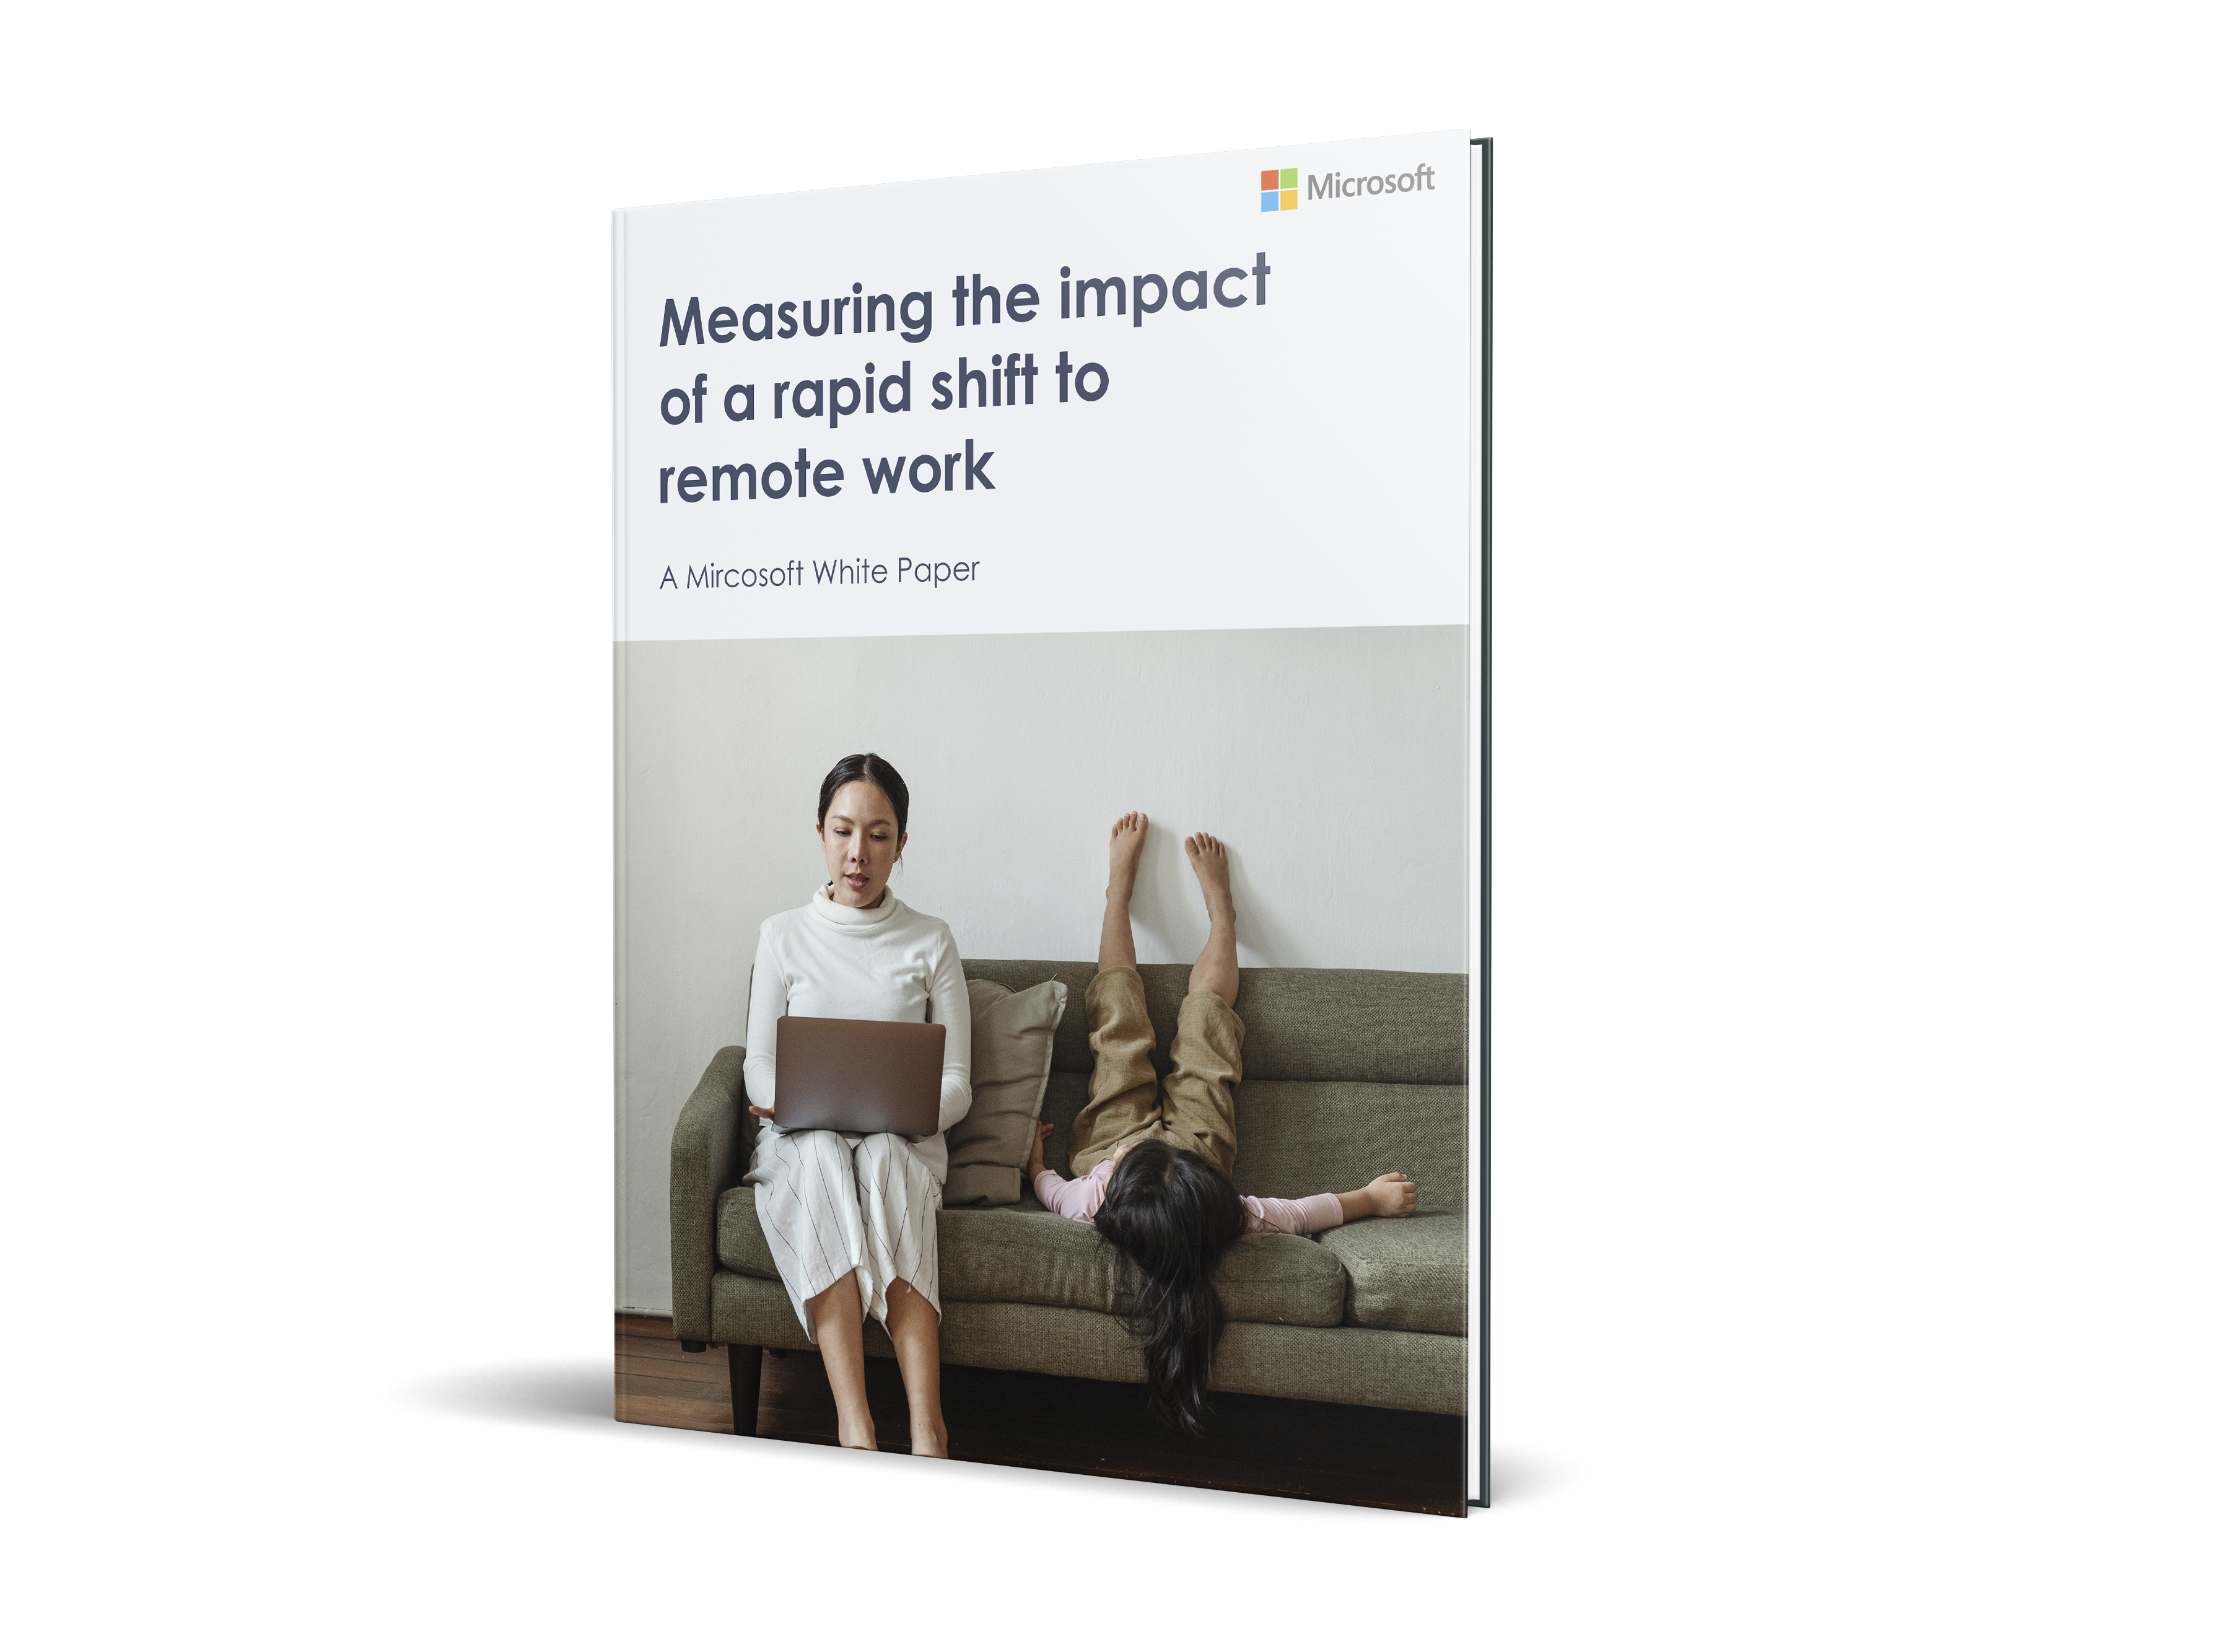 Measuring the impact of a rapid shift to remote work